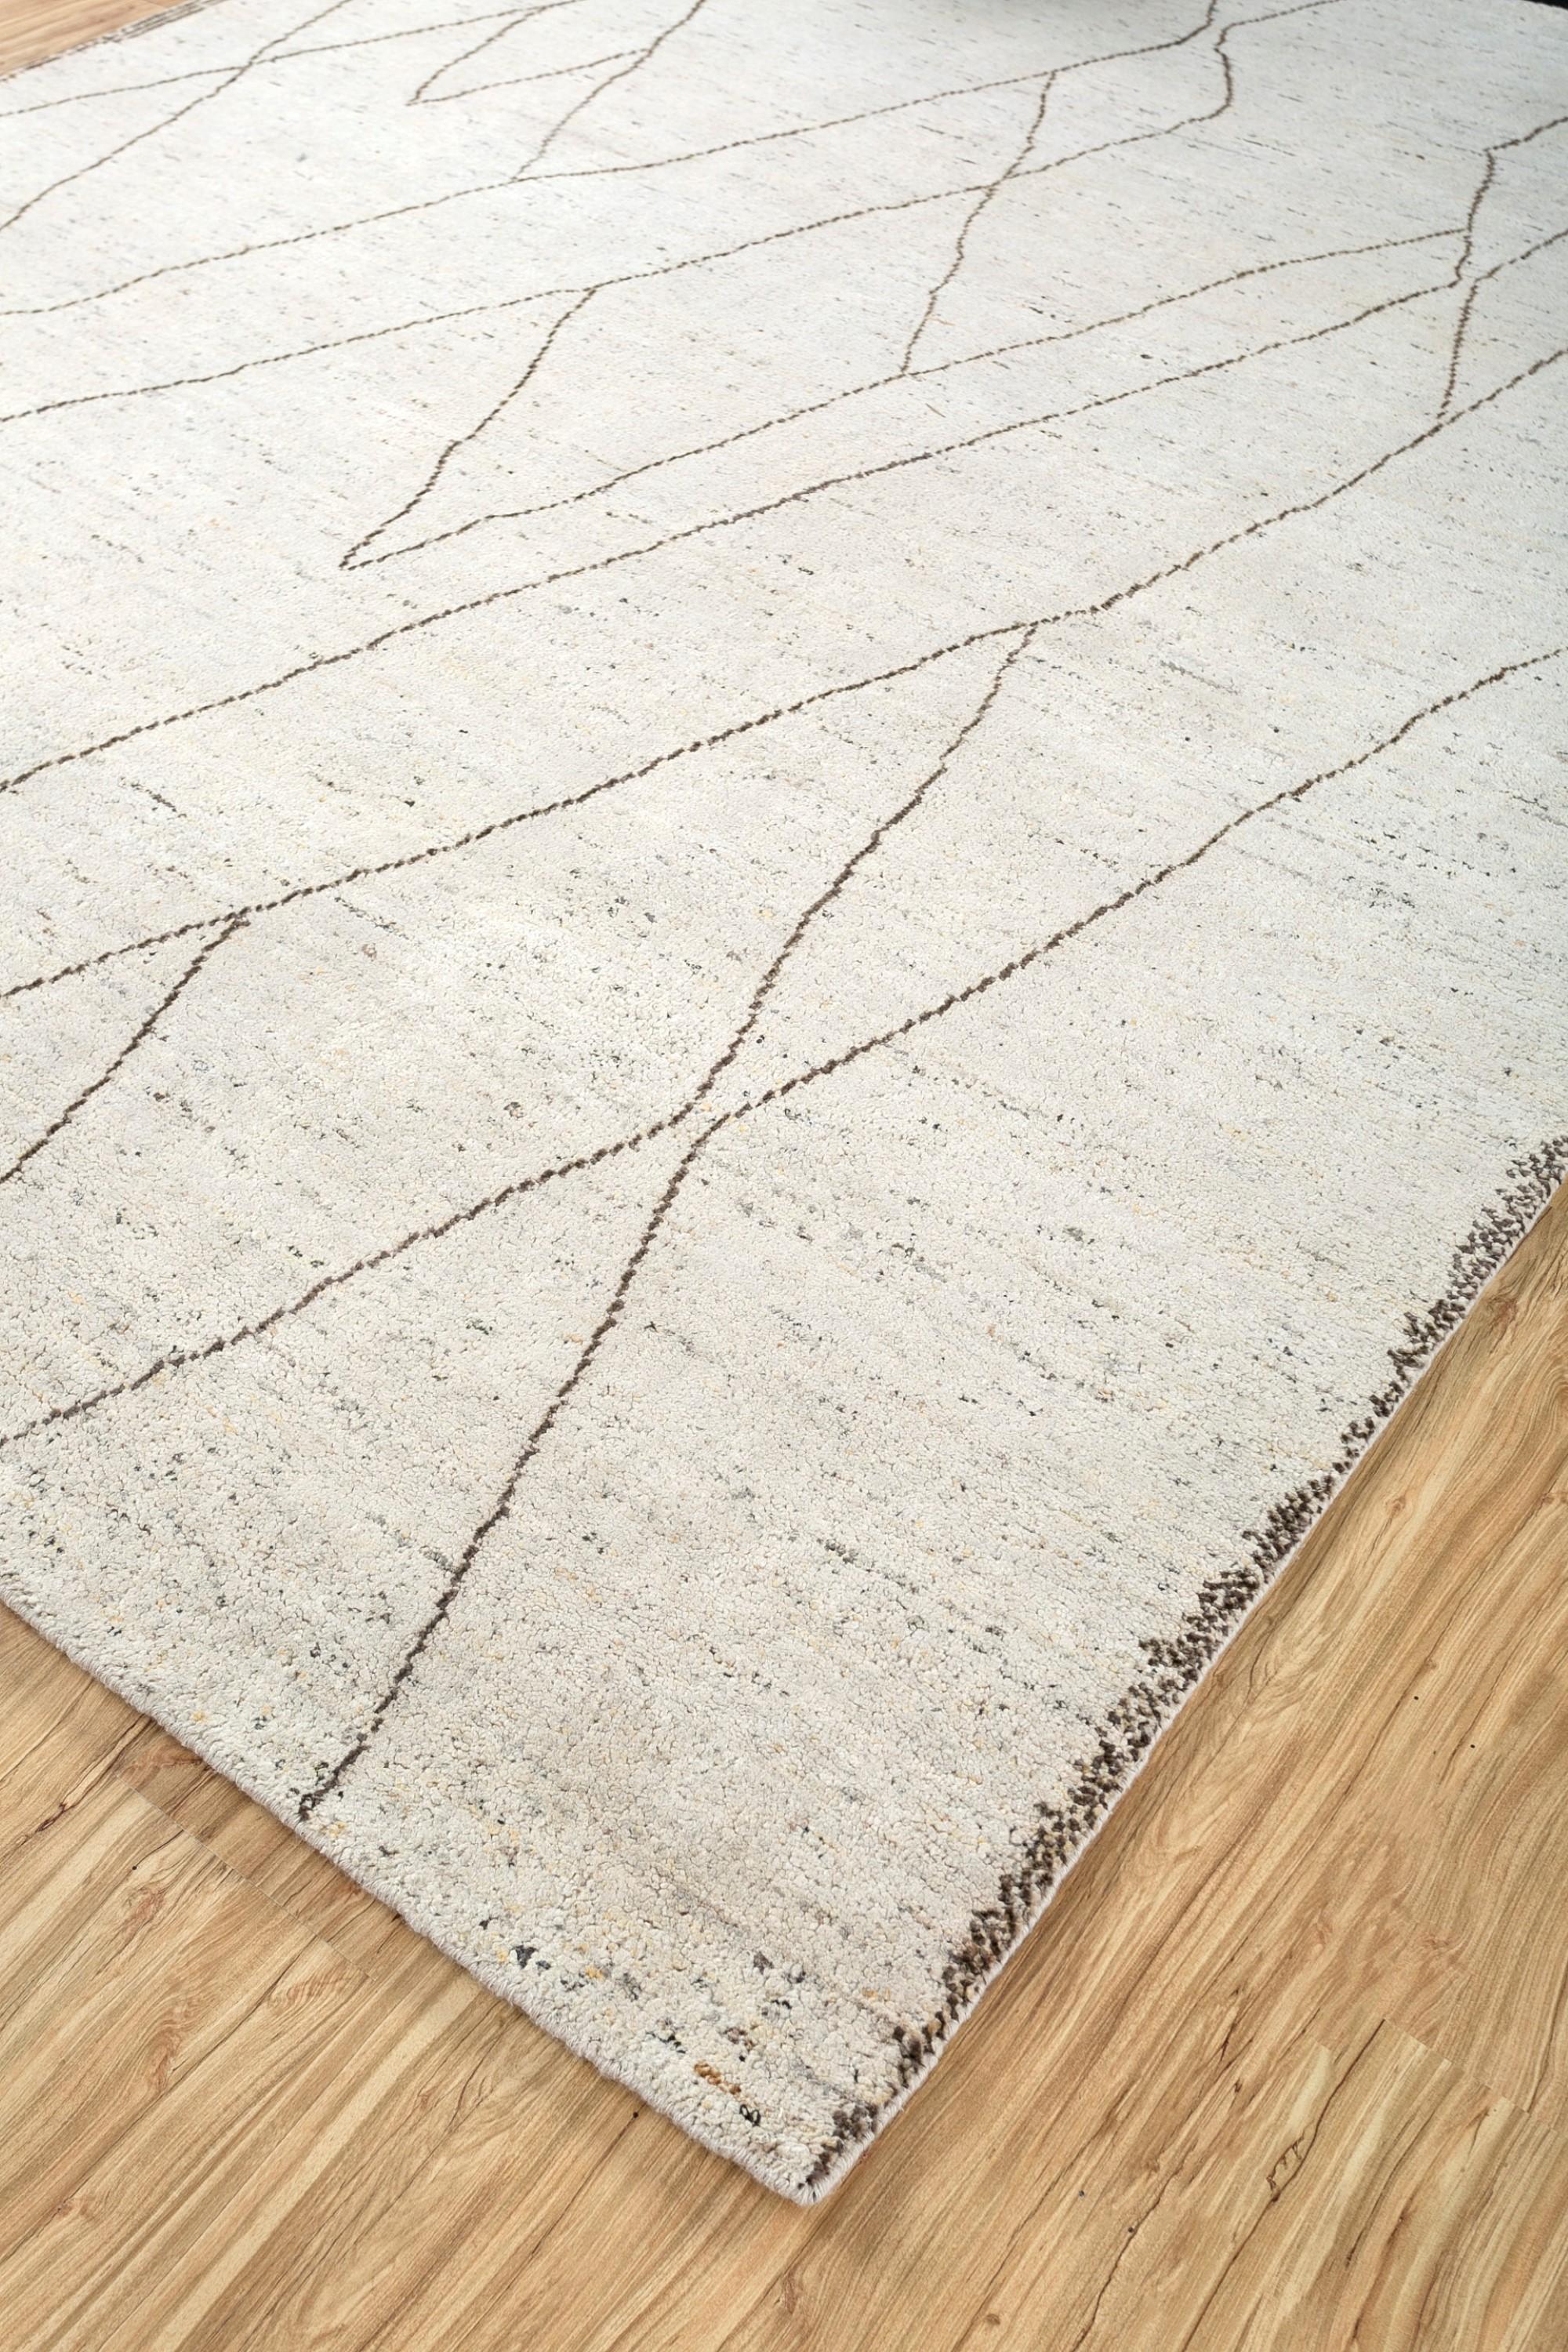 This handknotted wool rug, crafted in rural India, reimagines timeless motifs with an undeniably contemporary twist. The rich, natural white ground becomes a canvas for an eclectic tapestry of geometric shapes, their bold lines dancing with a subtle